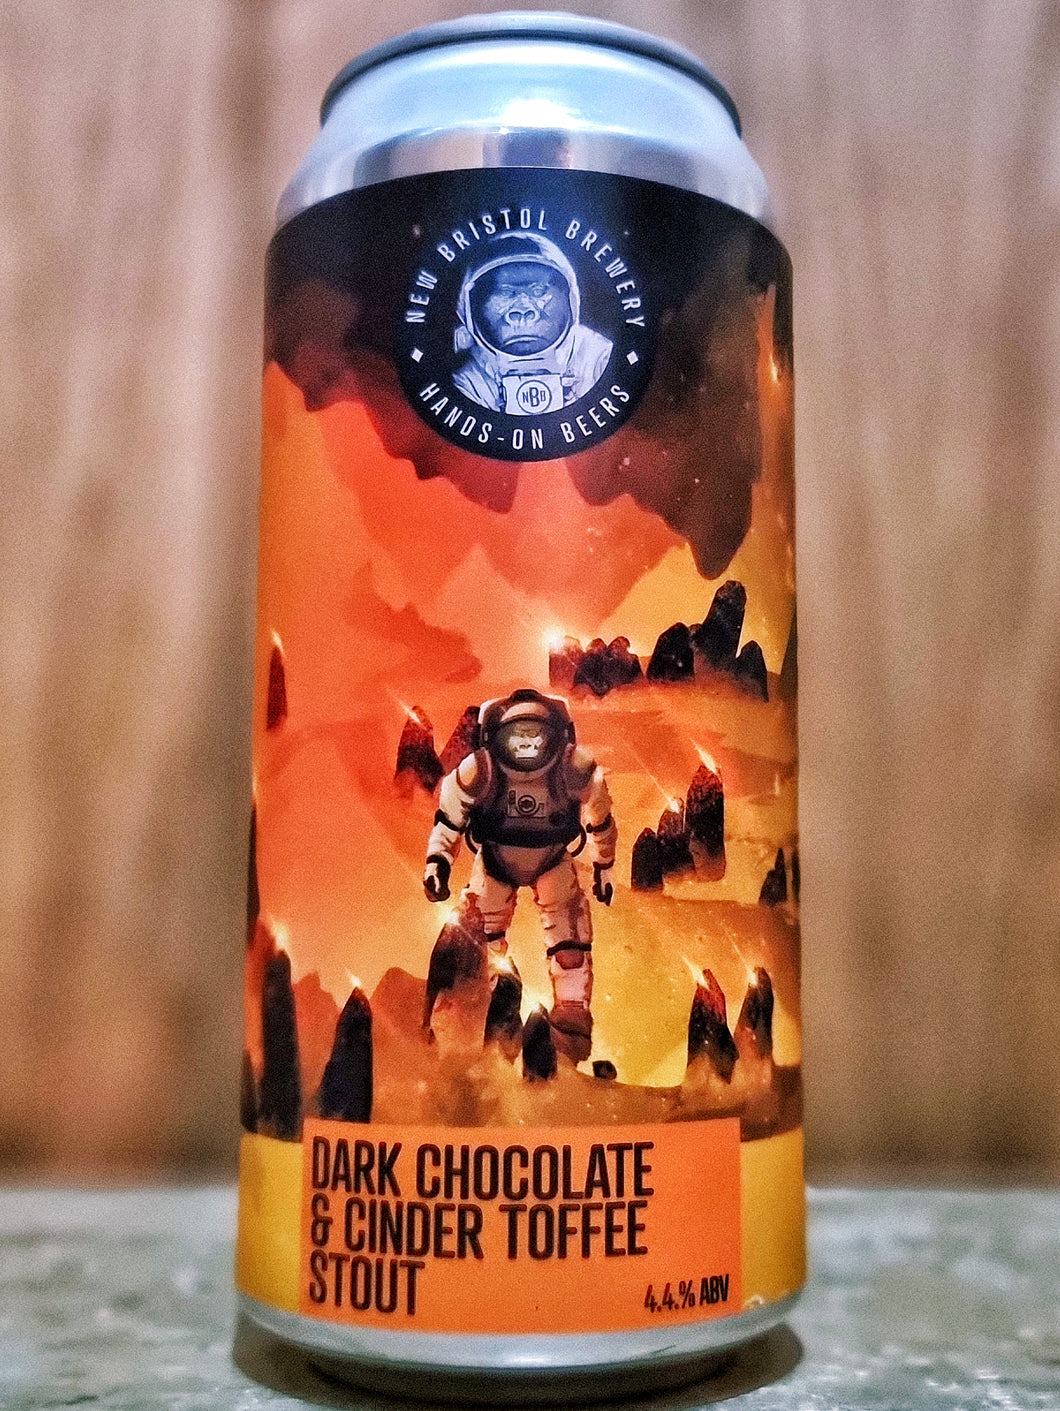 New Bristol Brewing Co - Dark Chocolate and Cinder Toffee Stout